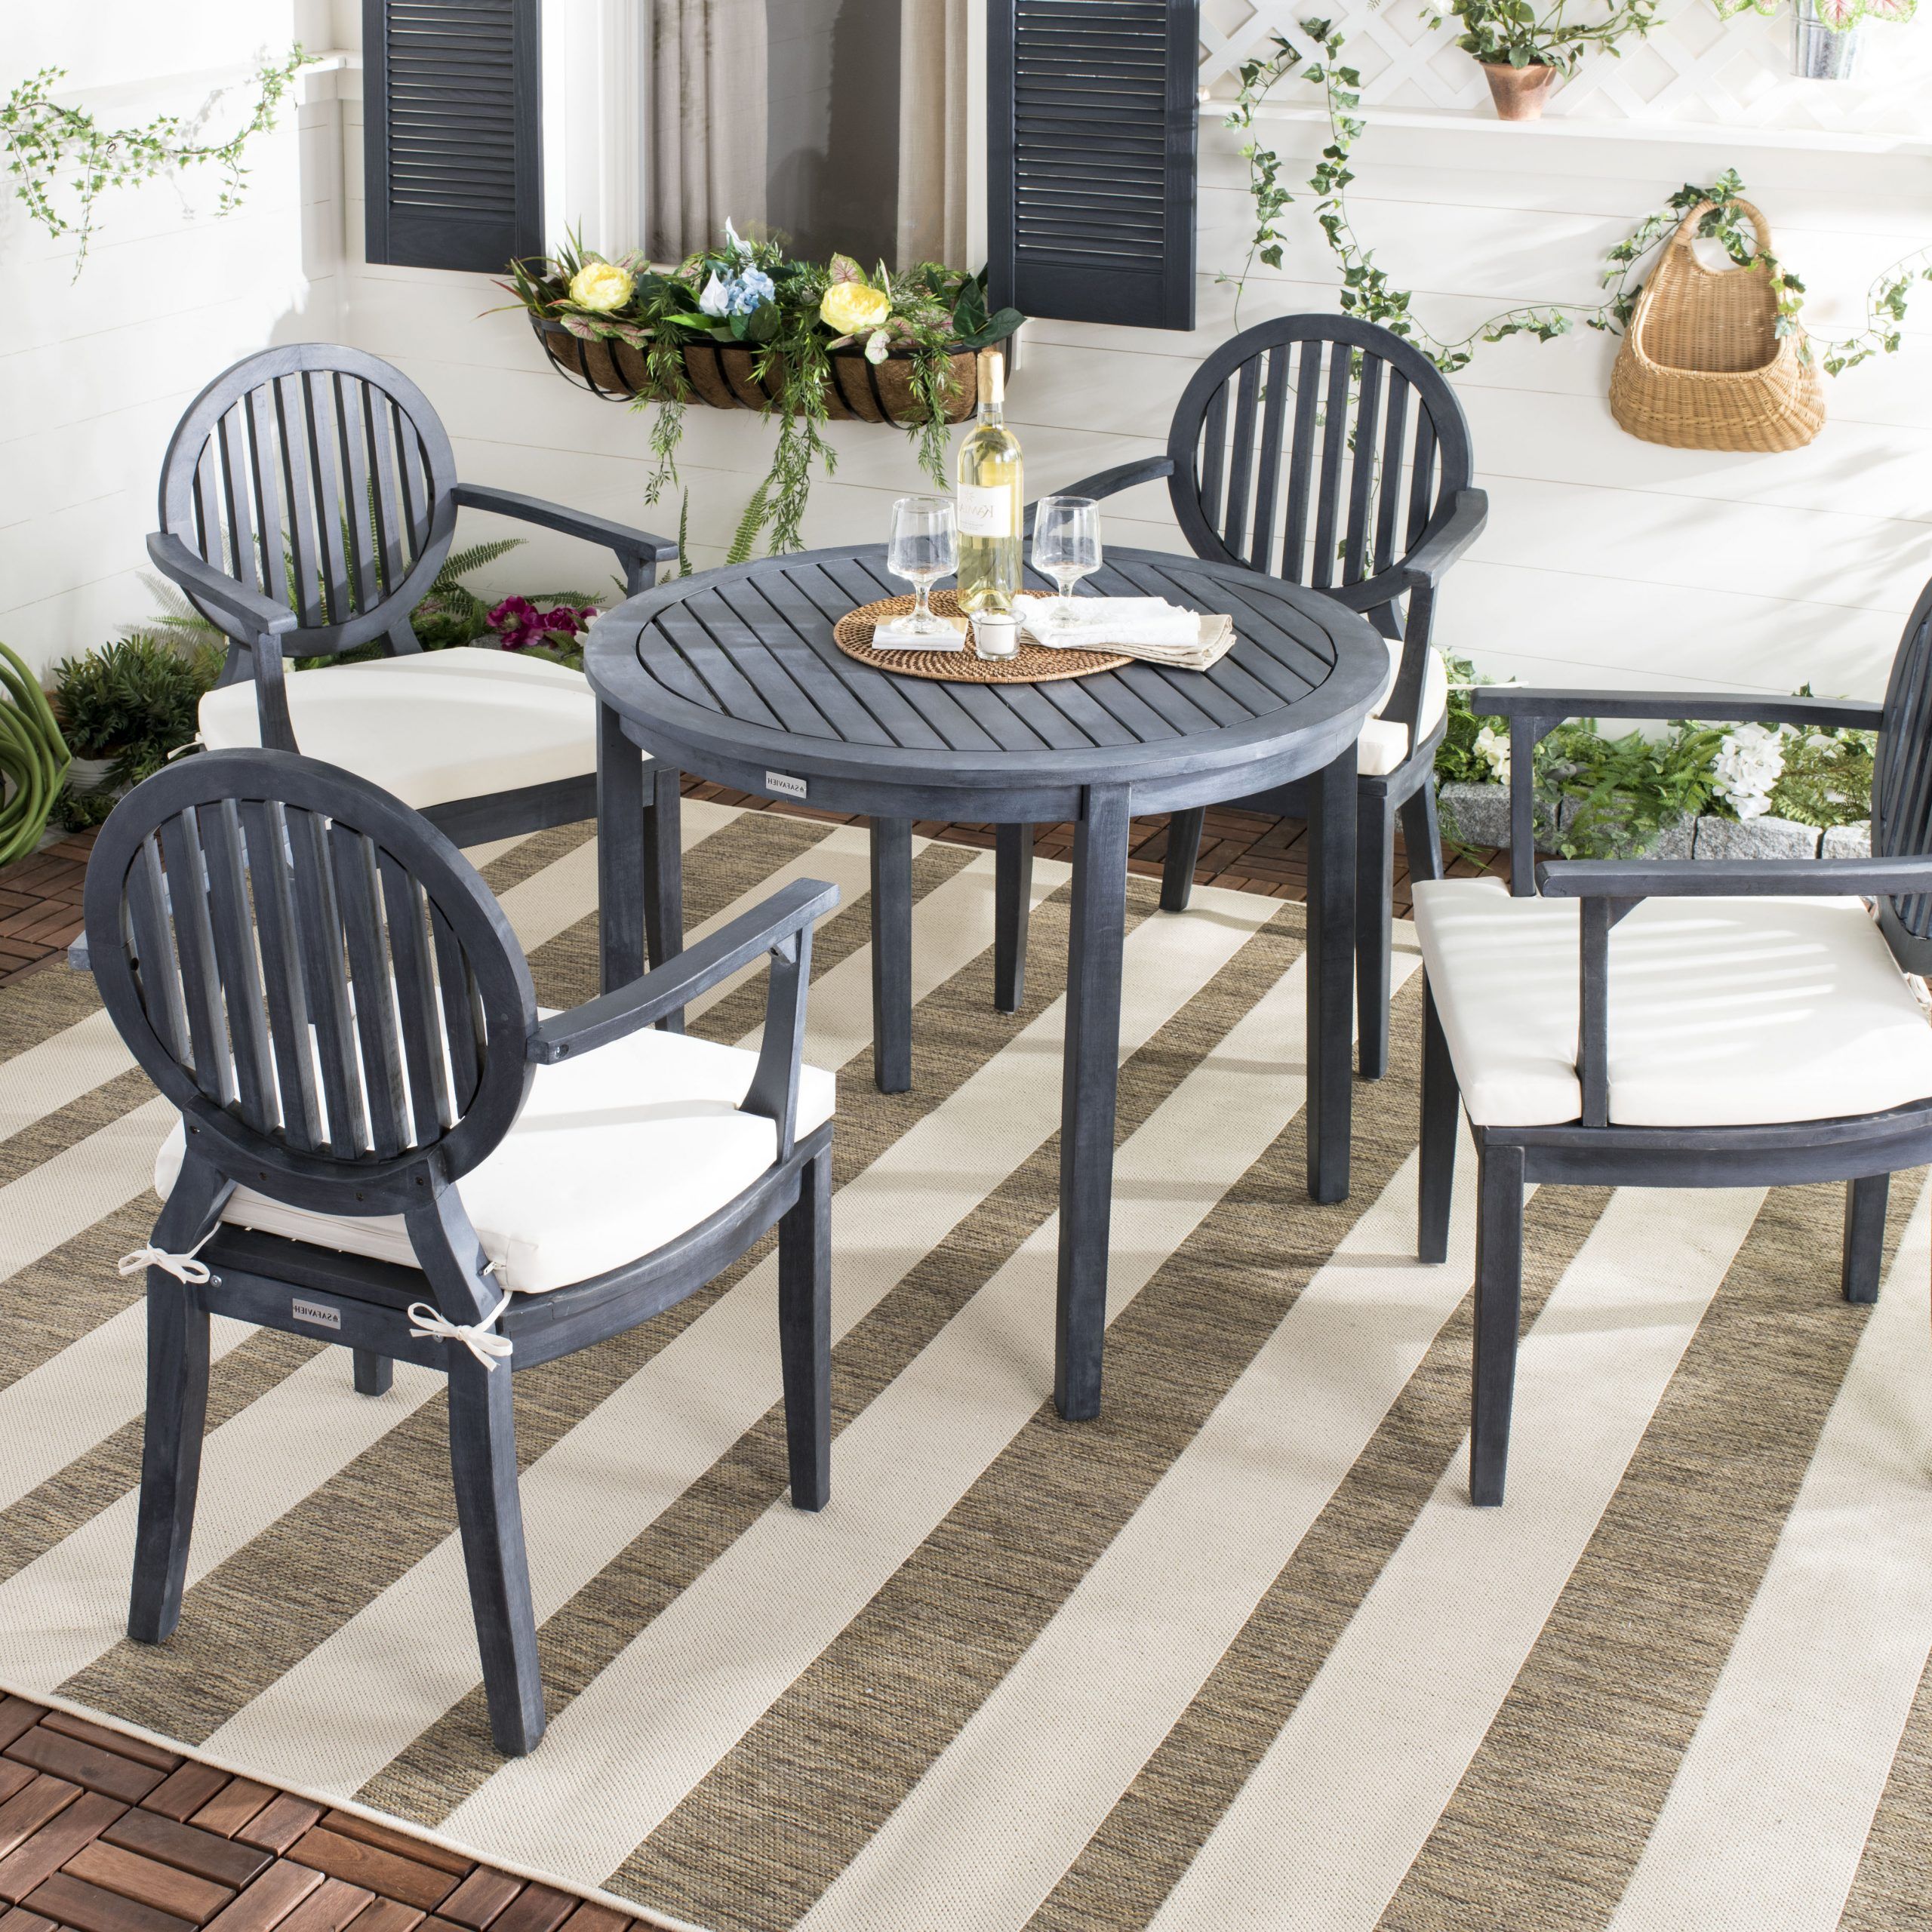 Favorite Safavieh Chino Outdoor Modern 5 Piece Dining Set Seat With Cushion Inside 5 Piece Outdoor Seating Patio Sets (View 9 of 15)